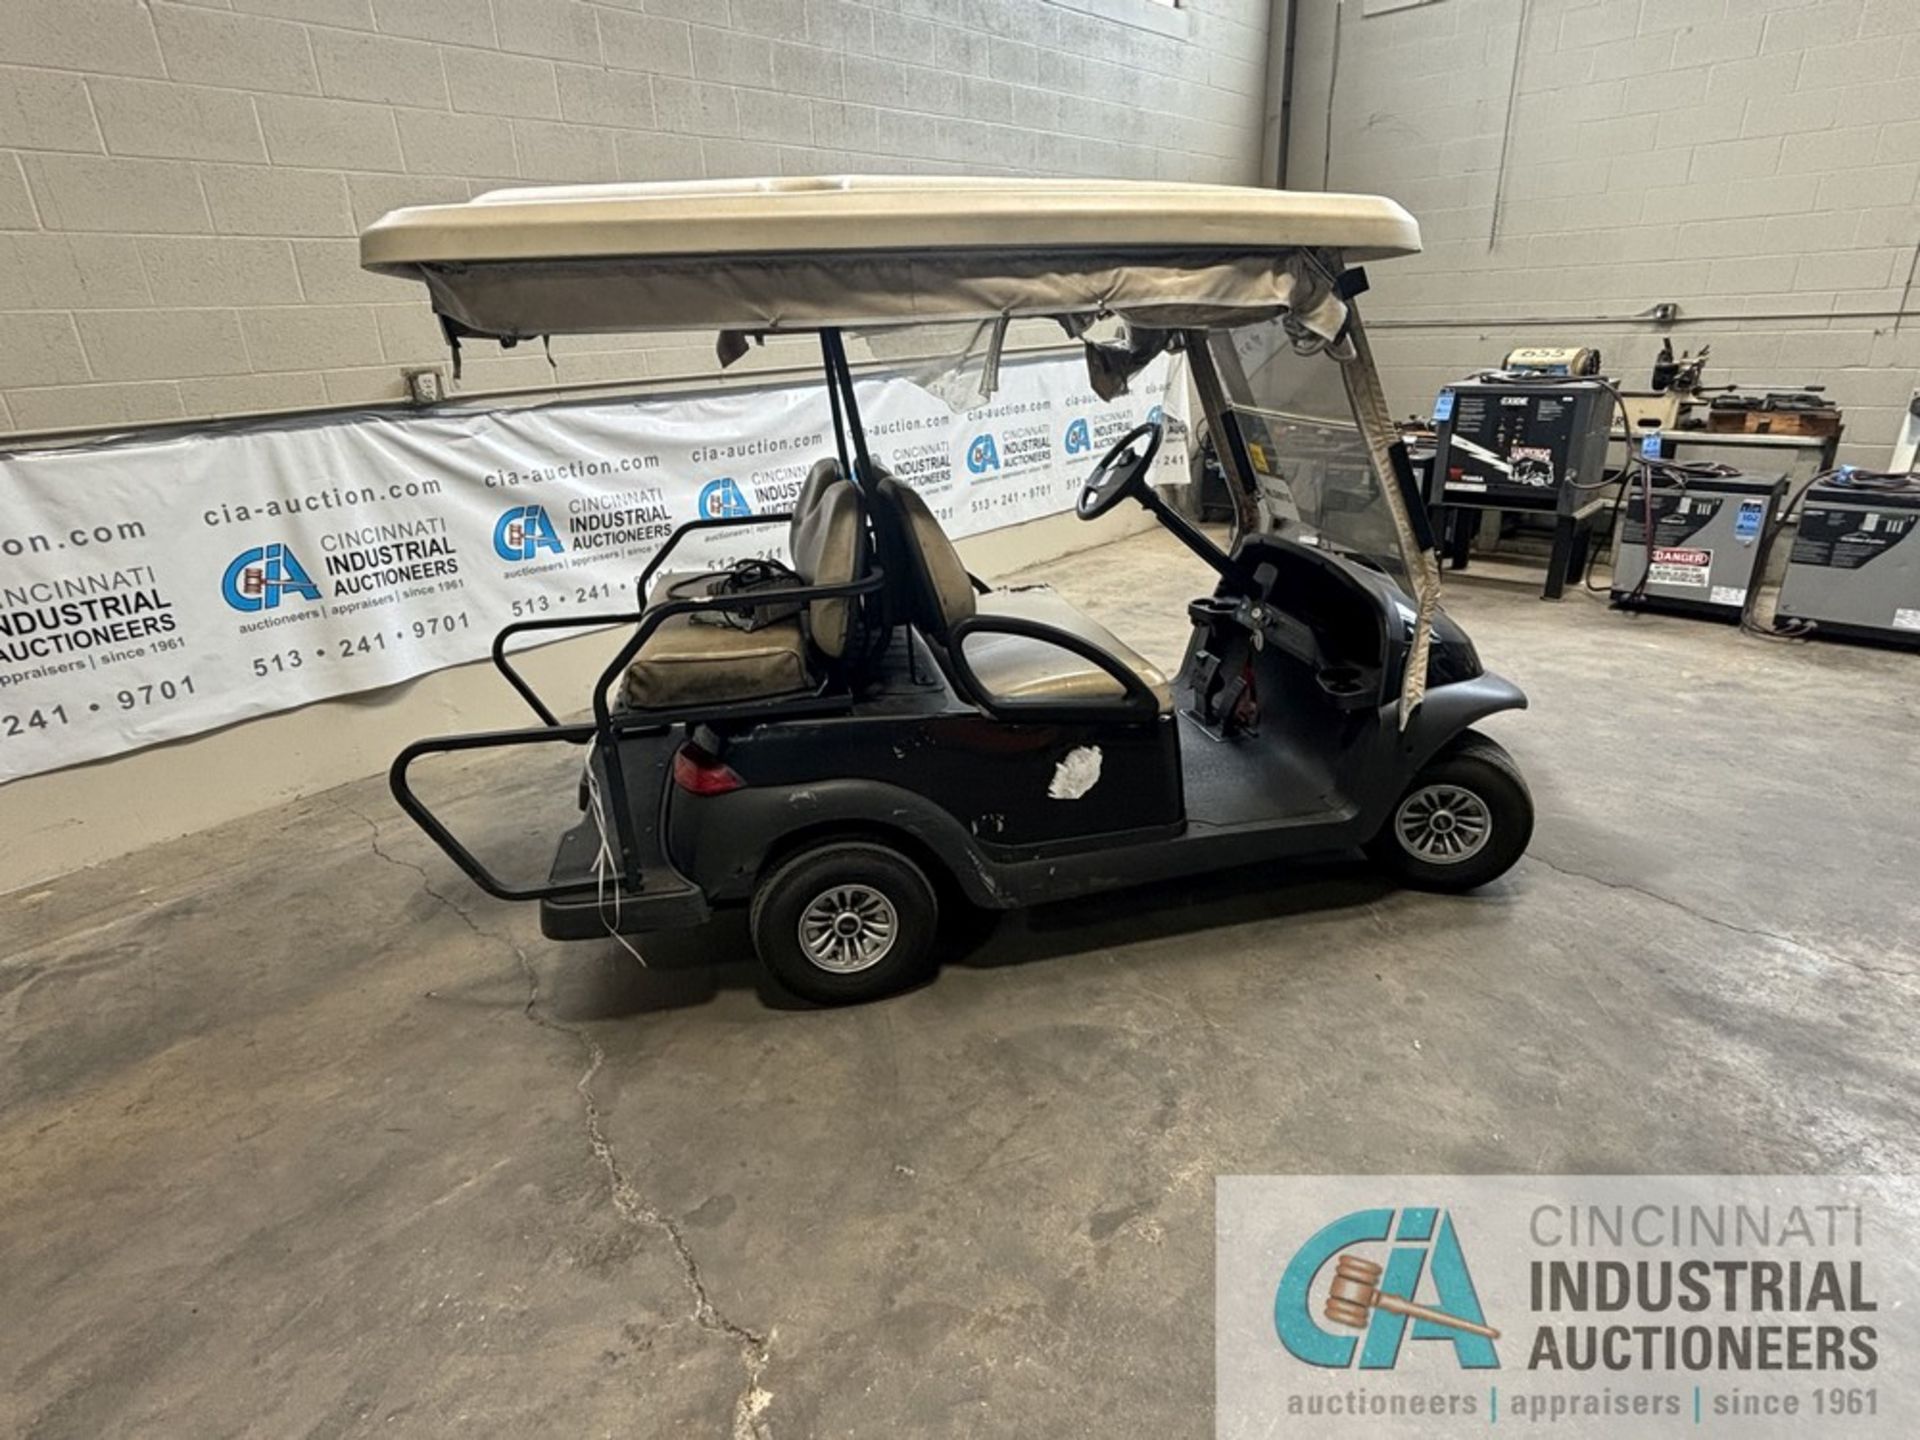 2015 CLUB CAR FOUR-PASSENGER ELECTRIC GOLF CART; S/N JH1541-596913, 48-VOLT, HOURS N/A, No Charger - Image 5 of 7